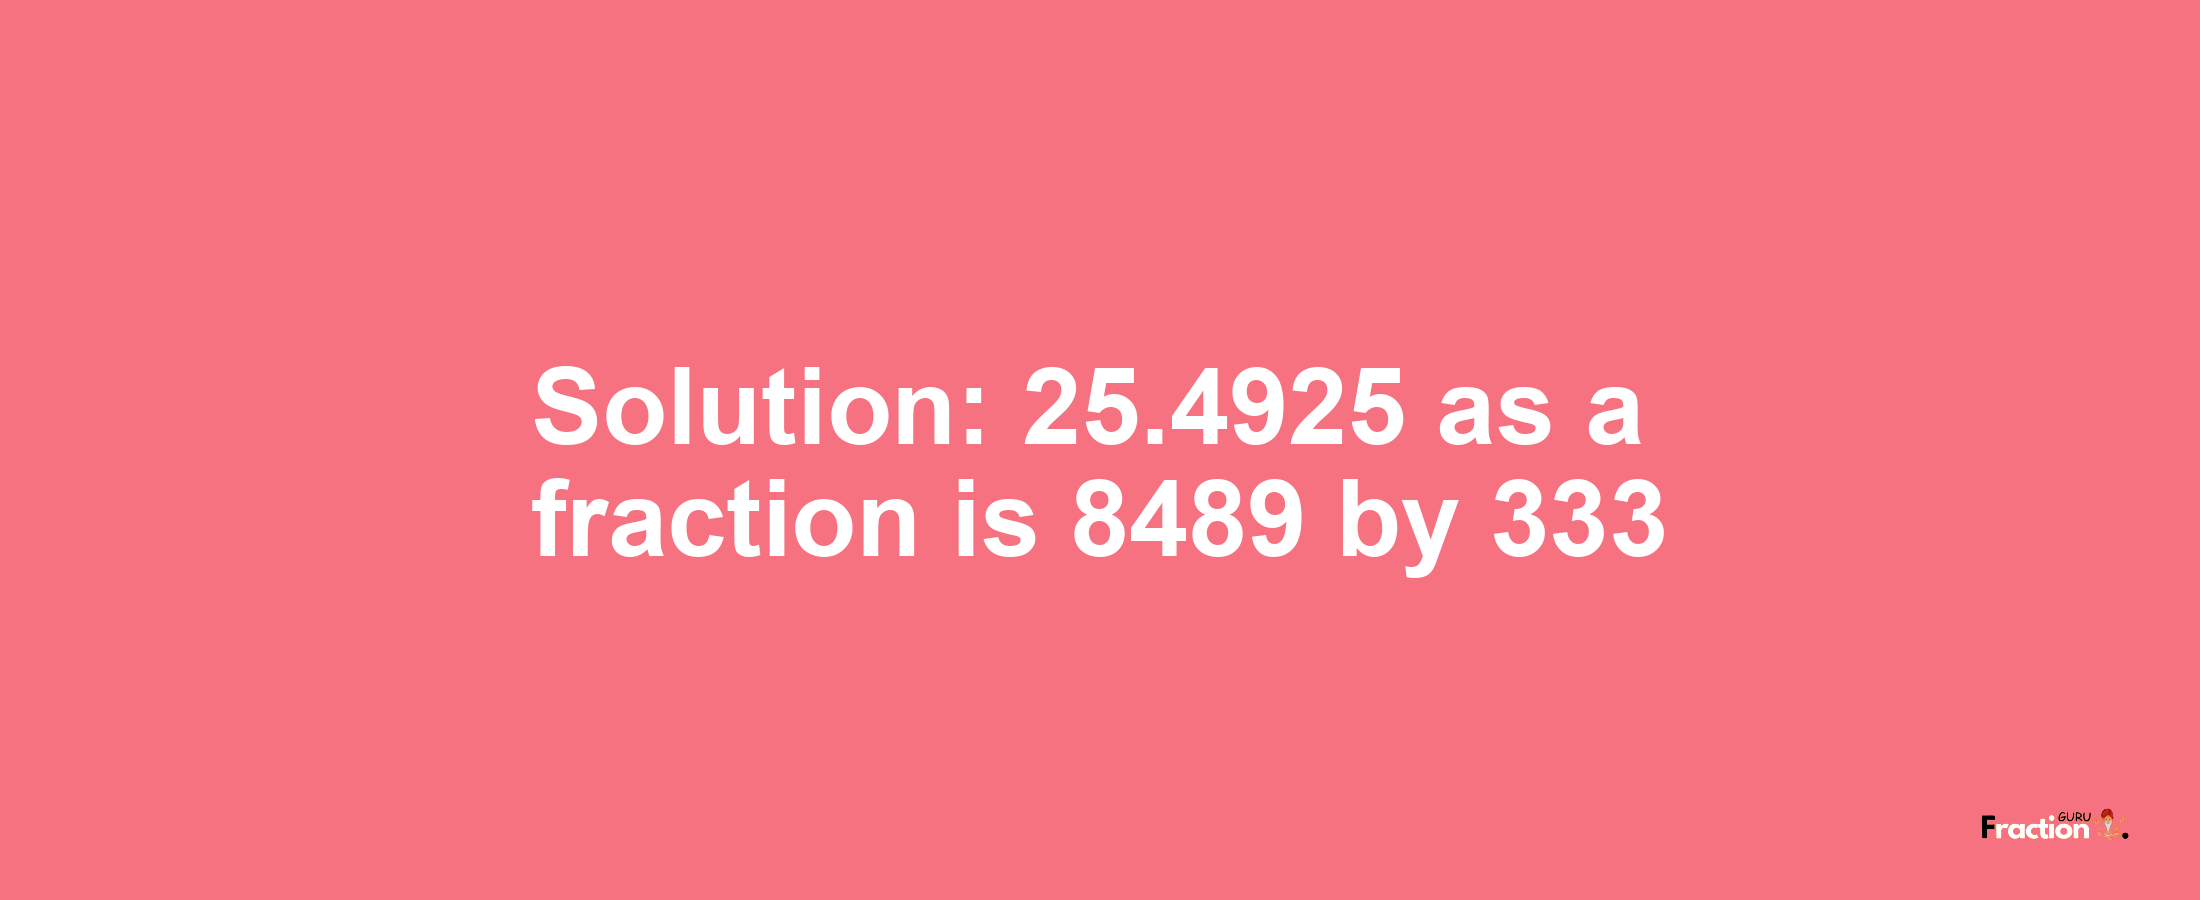 Solution:25.4925 as a fraction is 8489/333